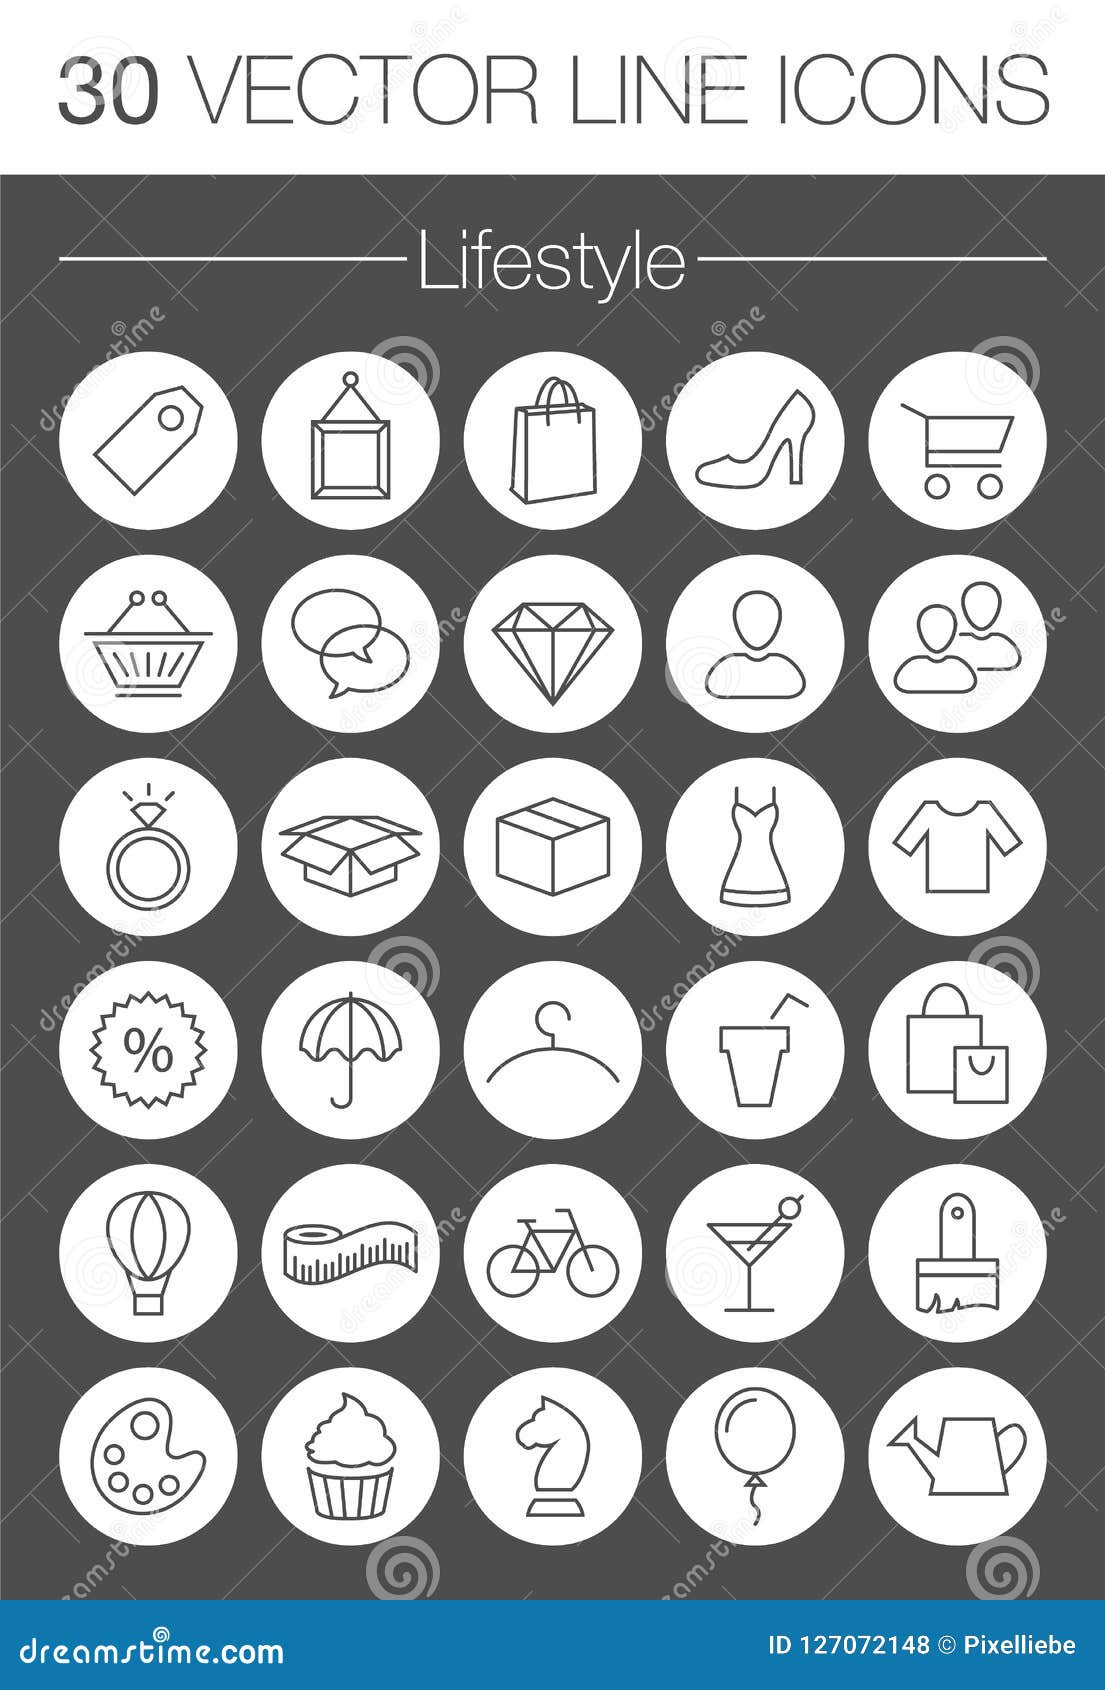 Lifestyle vector icons set stock illustration. Illustration of offer ...